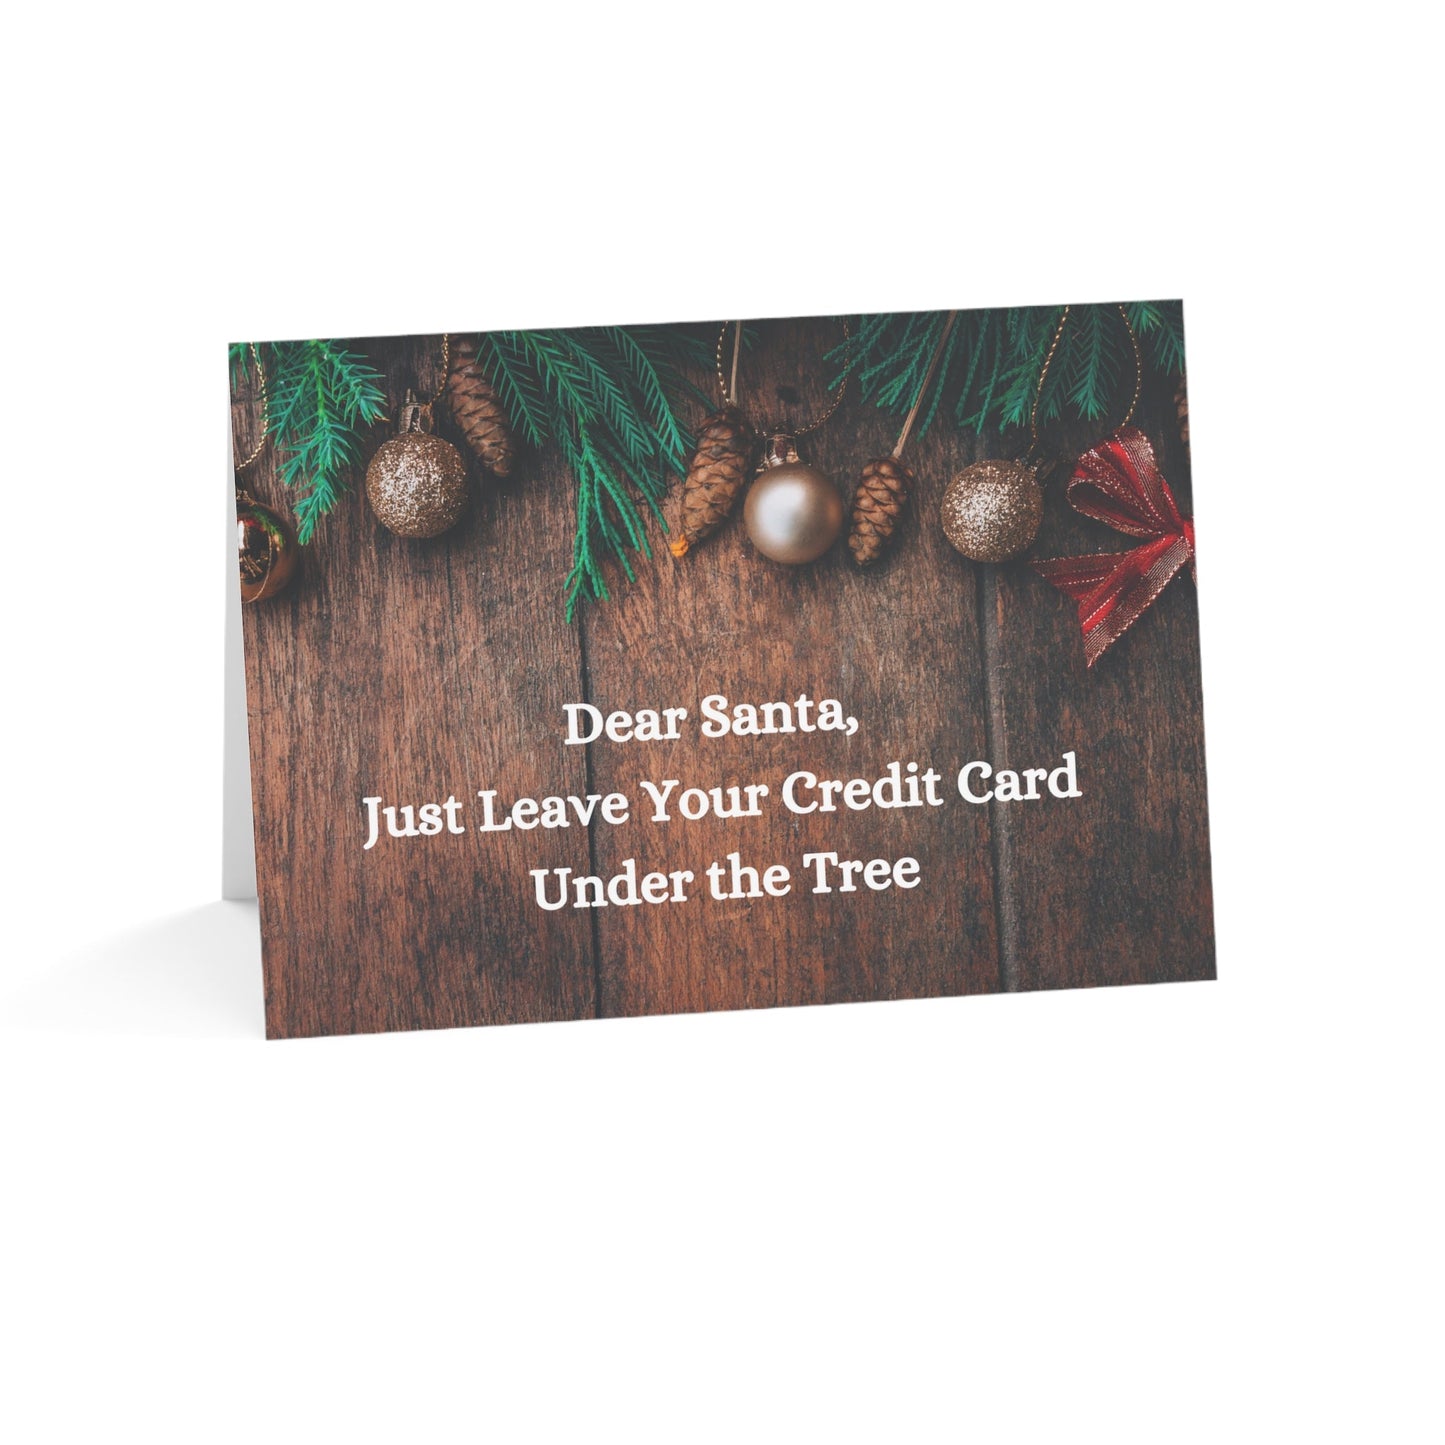 Credit Card Christmas Greeting Cards (1, 10, 30, and 50pcs) Yeah That Shop